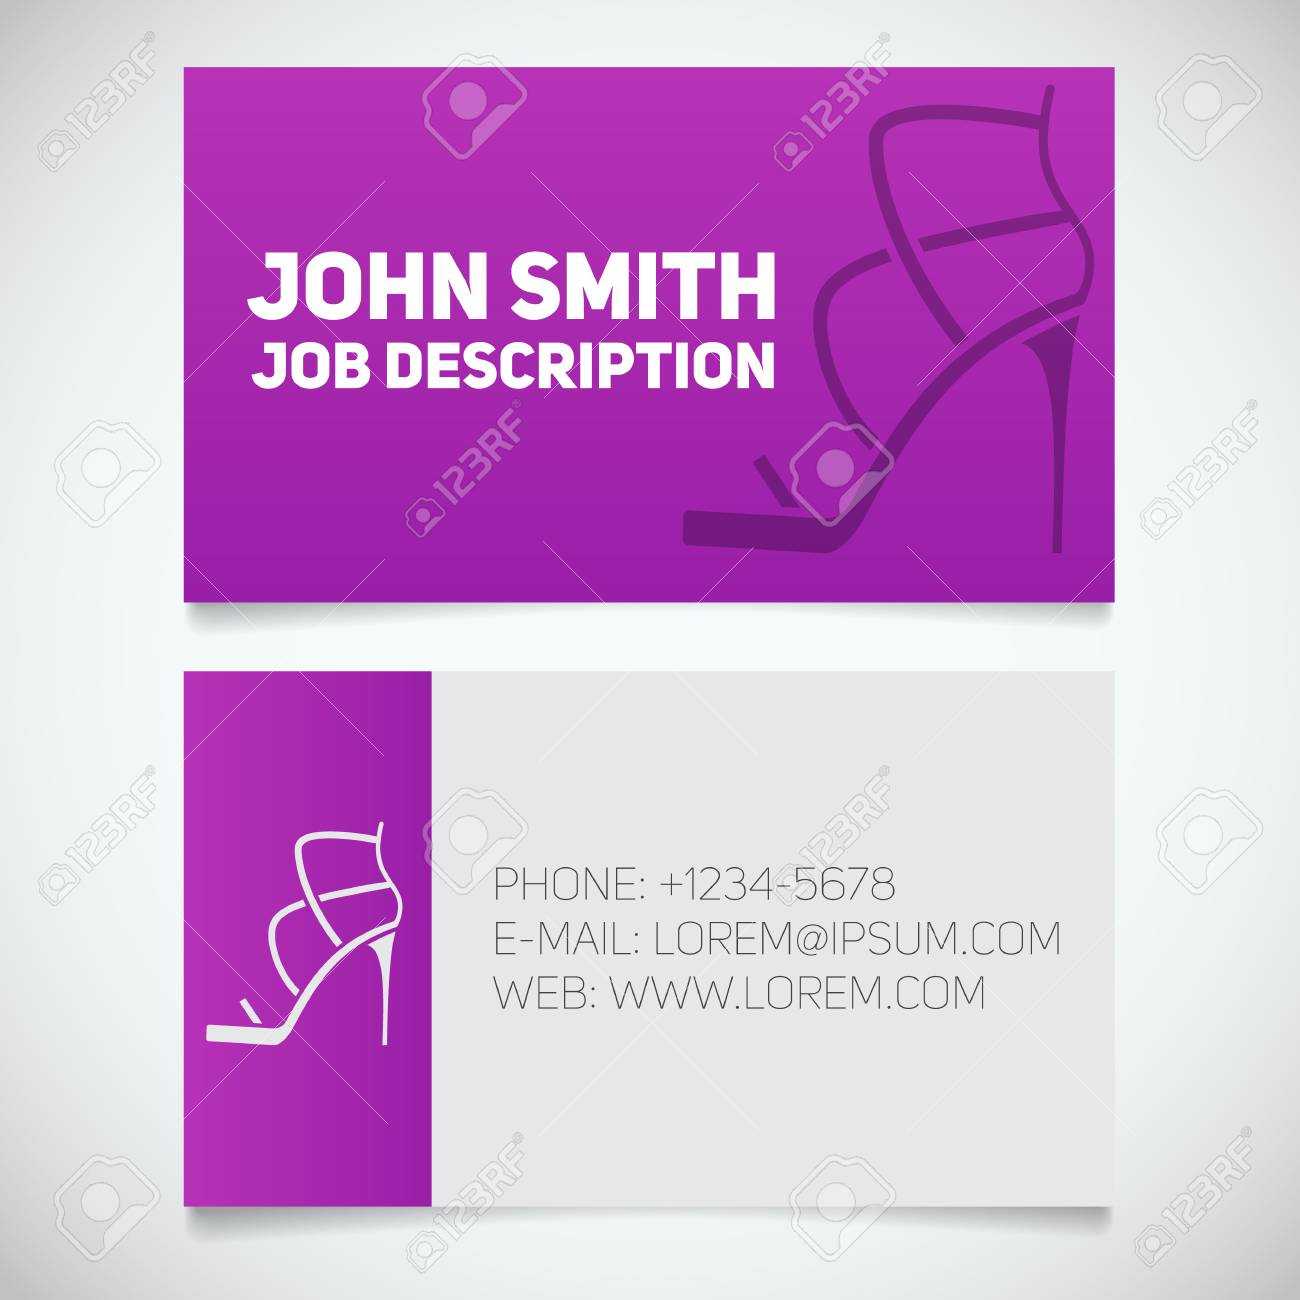 Business Card Print Template With High Heel Shoe Logo. Manager Within High Heel Template For Cards